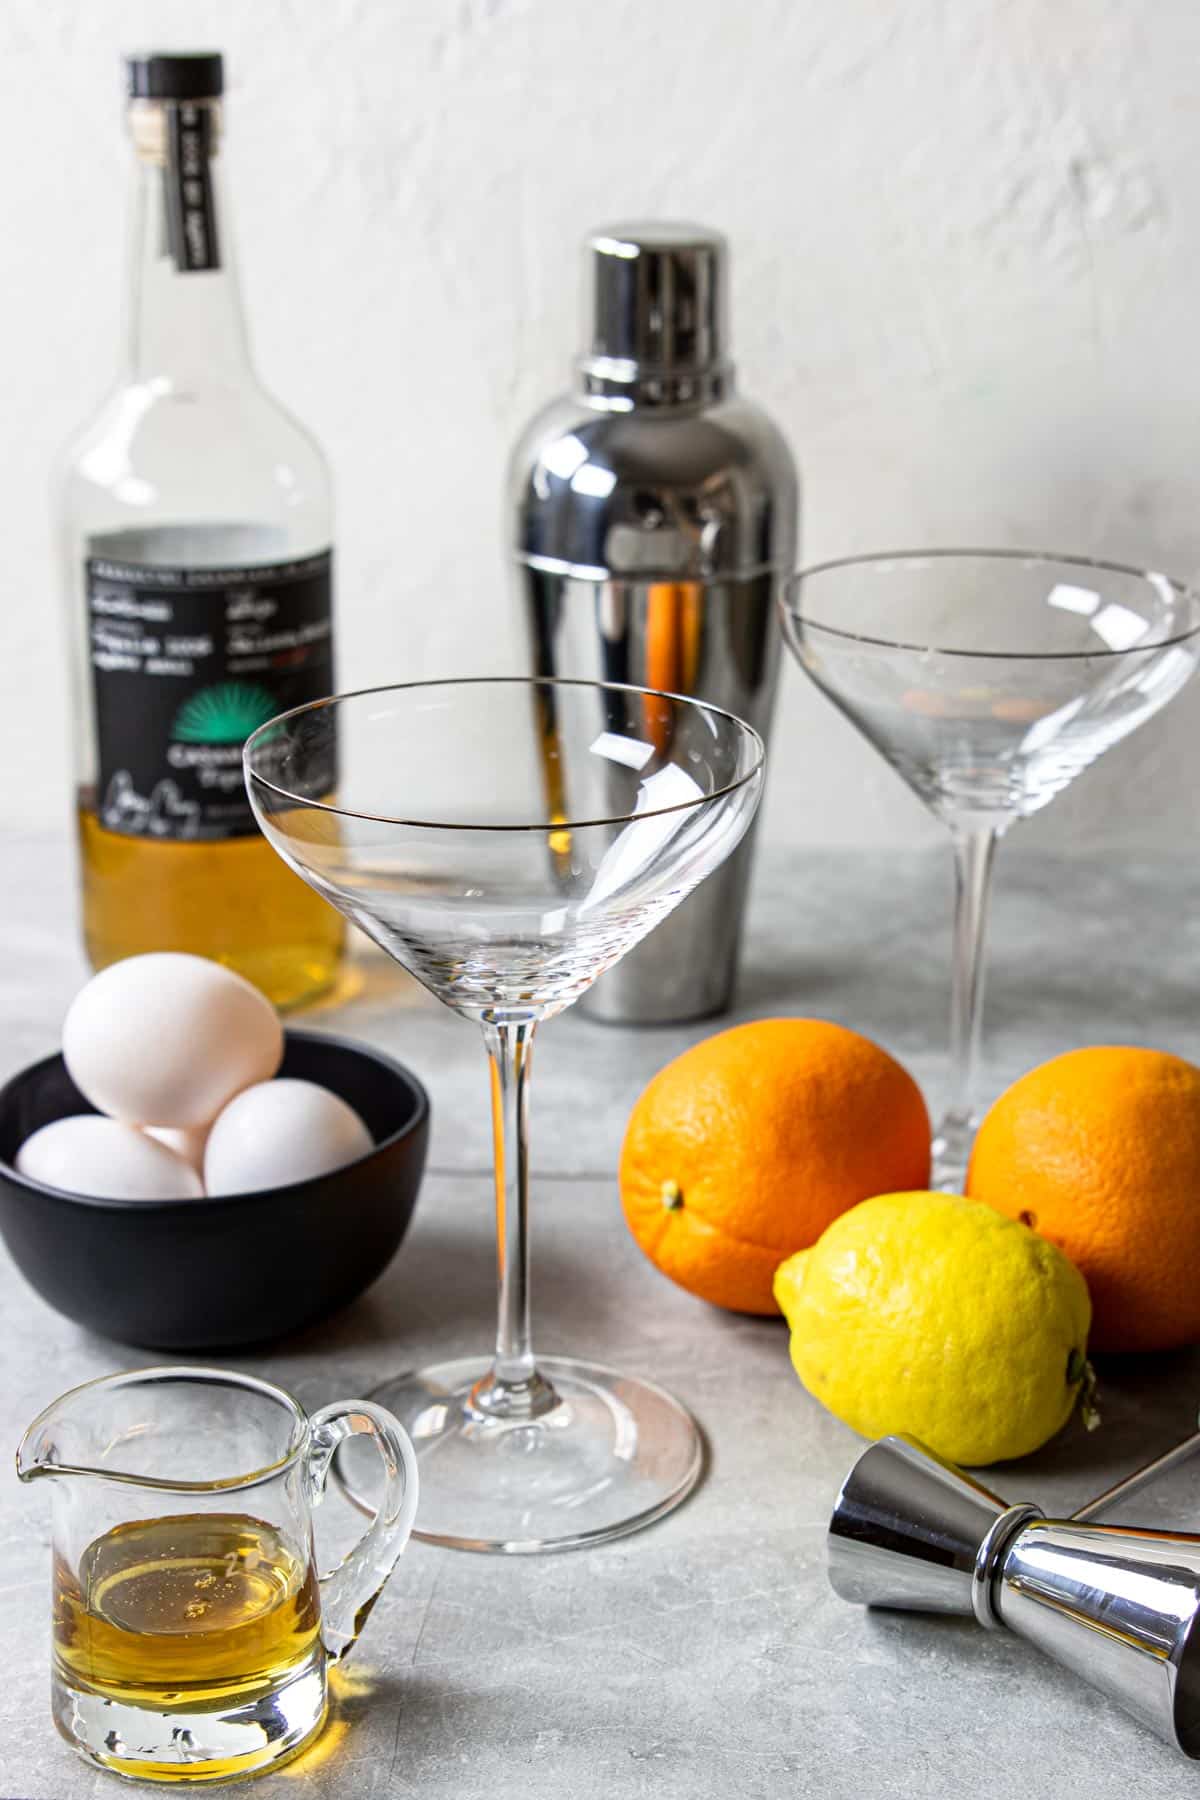 Ingredients and equipment to make a tequila sour recipe